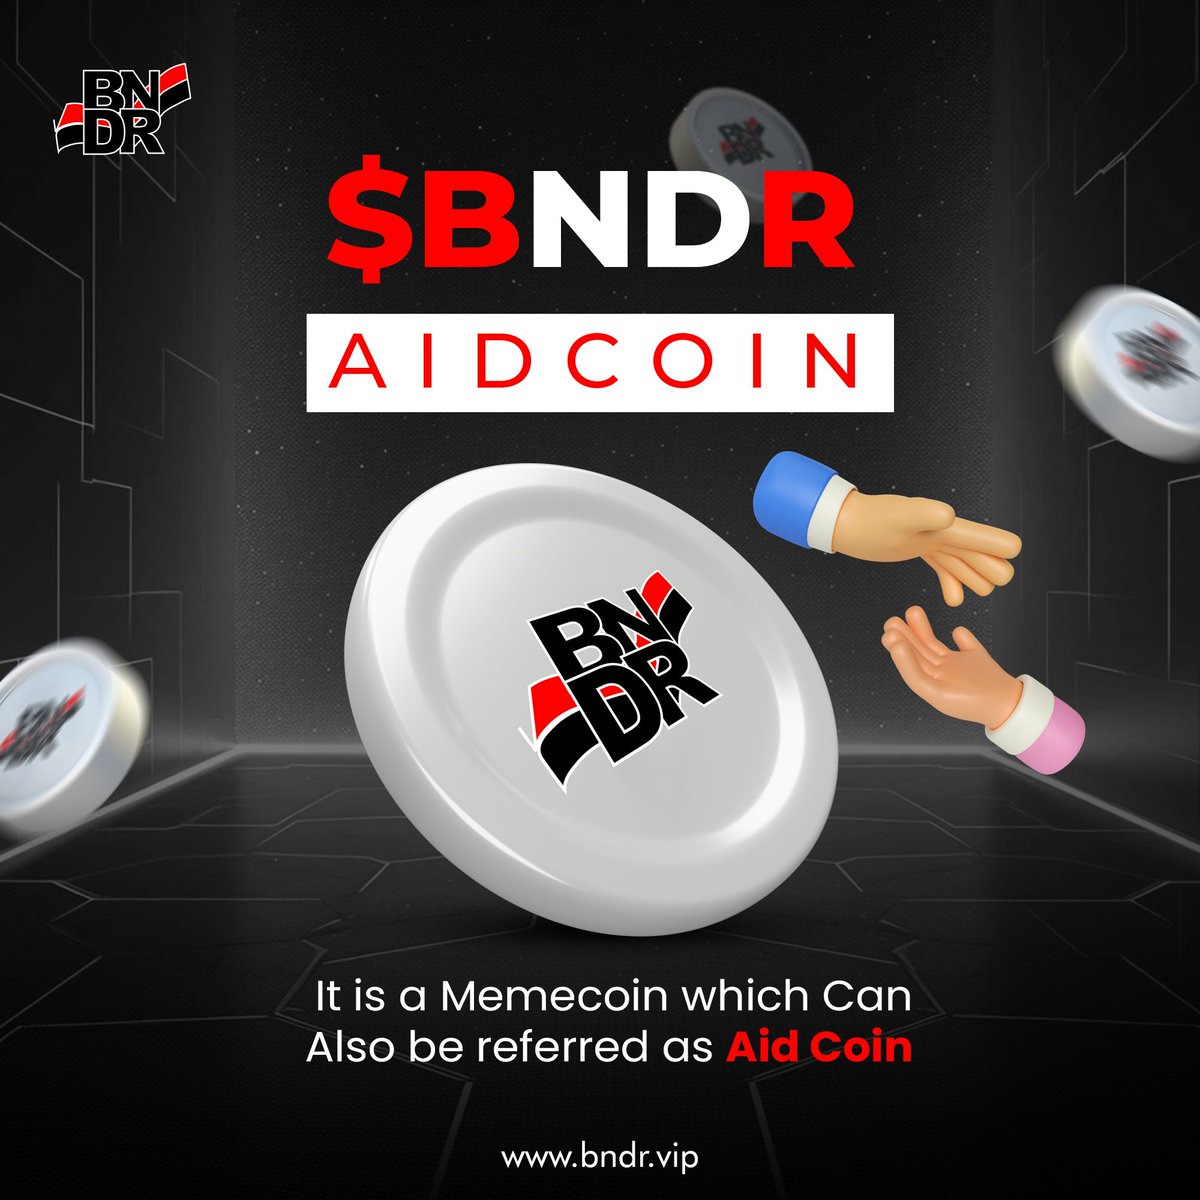 🚀 Join the revolution with $BNDR Aidcoin!

 the meme coin with a heart! 💖 Fueling positivity and making a difference one transaction at a time. Get in on the action and spread the love! 

Visit: bndr.vip/?utm_source=Co…

#BNDR #AidCoin #CryptoForGood #BNDRCoin #Memecoin2024…